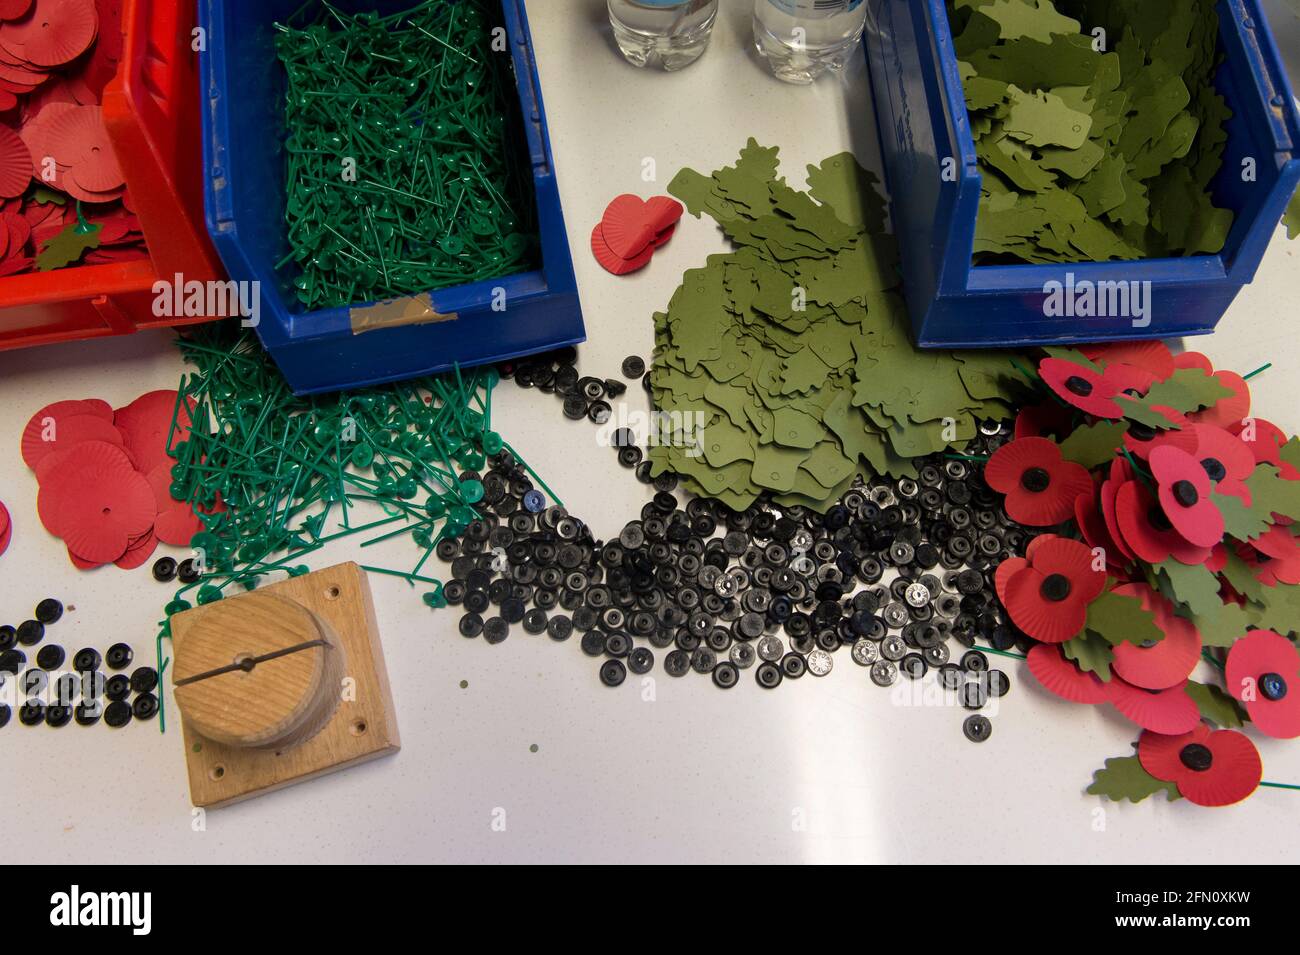 Components for making poppies, The Royal British Legion's Poppy Factory, 20 Petersham Road, Richmond, London, UK. The Poppy Factory employs ex-service personnel to makes poppies, remembrance crosses, sprays and wreaths for The Royal British Legion’s annual Appeal and Remembrance Day. The Poppy Factory is also responsible for planting and hosting The Field of Remembrance at Westminster Abbey. The Royal British Legion's Poppy Factory, 20 Petersham Road, London, UK.  16 Oct 2013 Stock Photo